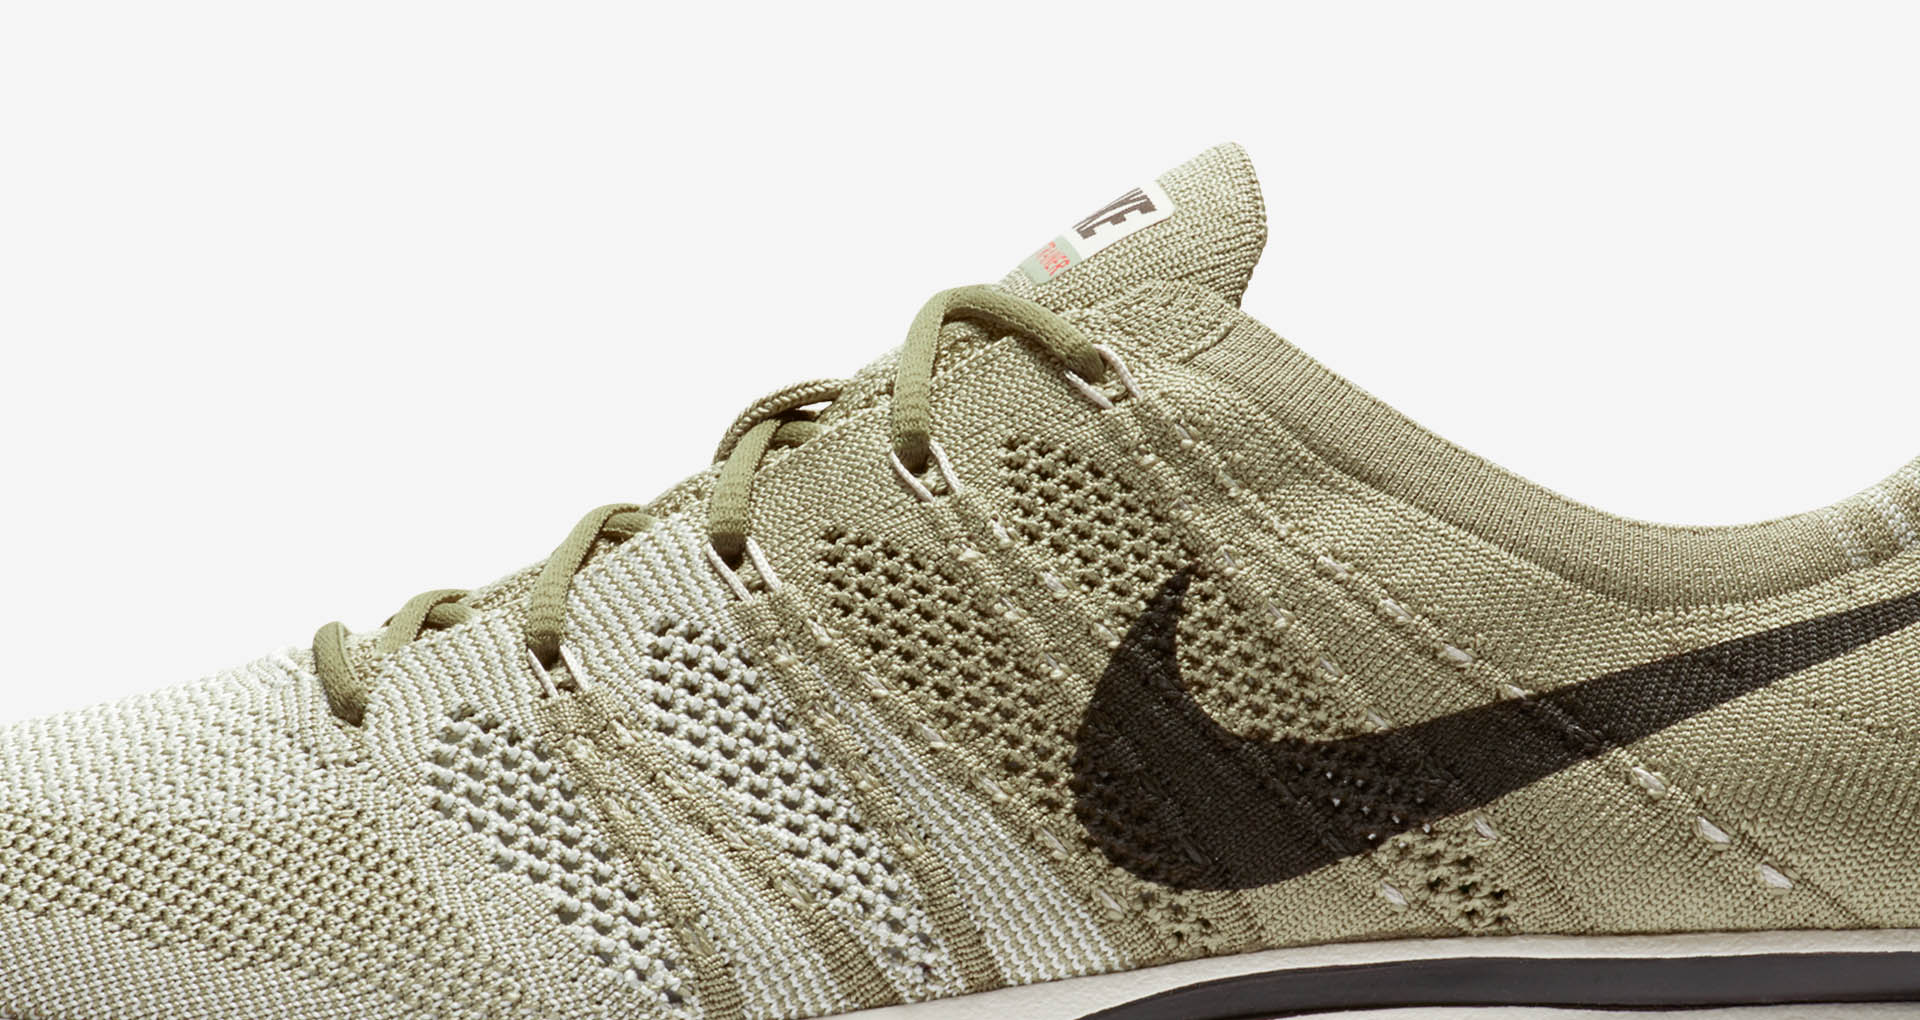 07-nike-flyknit-trainer-olive-brown-ah8396-201